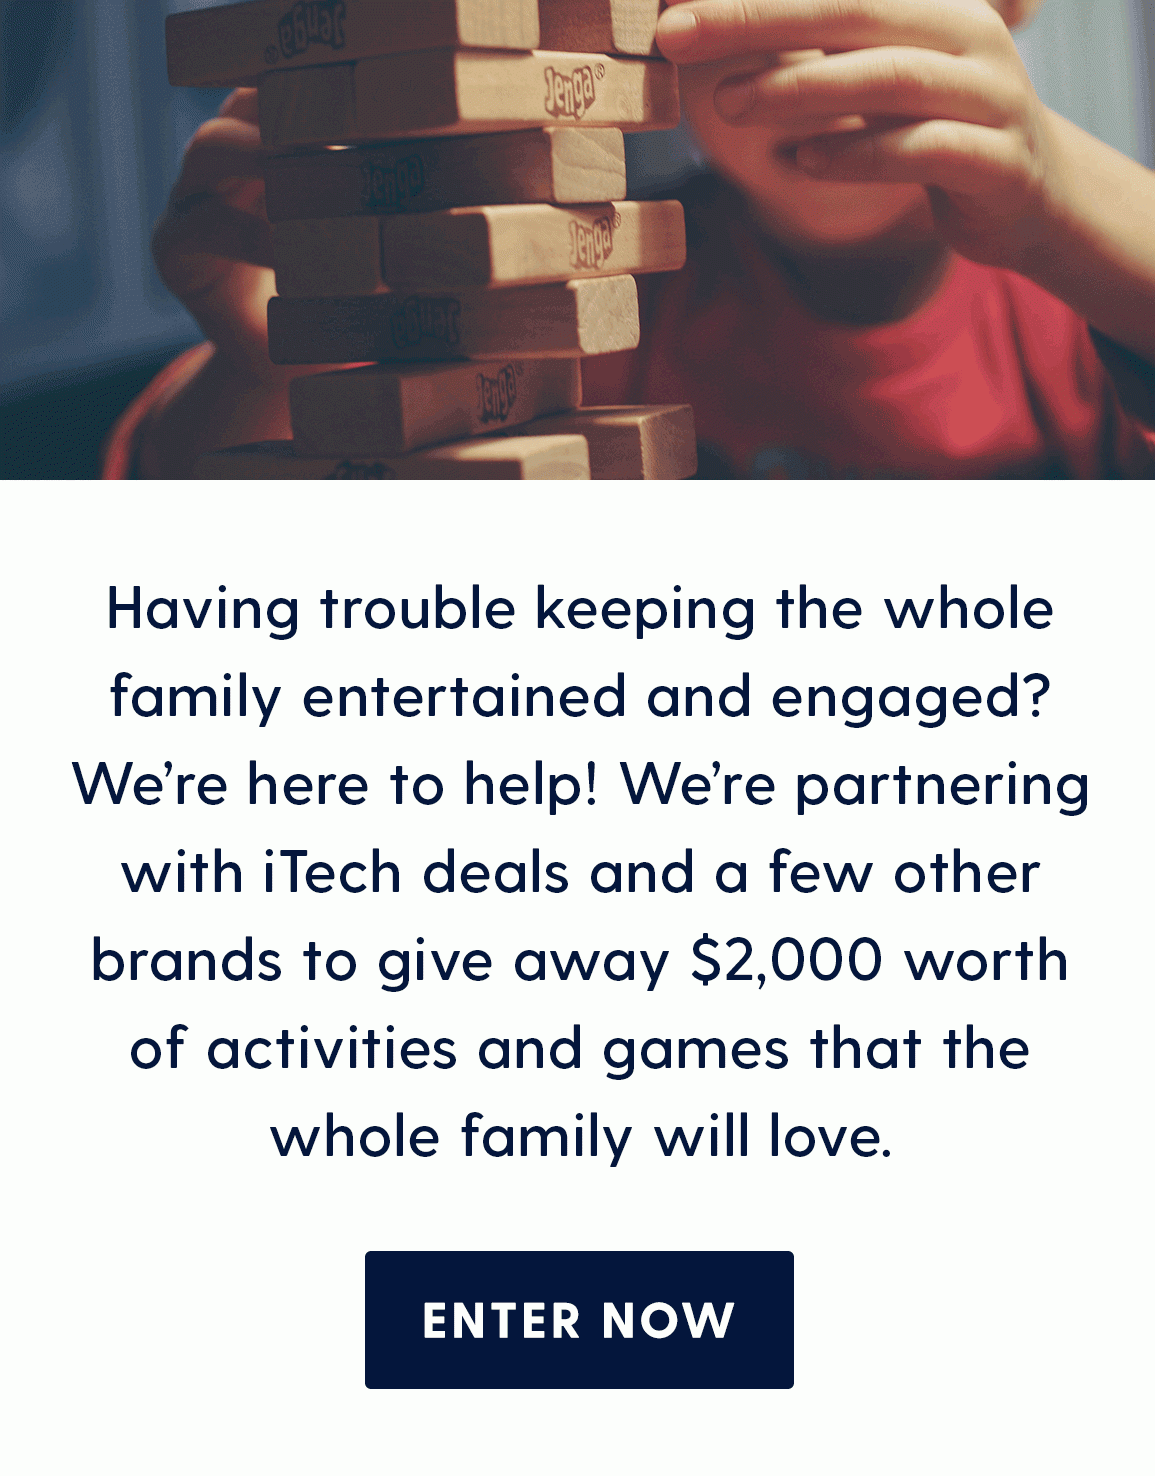 Having trouble keeping the whole family entertained and engaged? We’re here to help! We’re partnering with iTech deals and a few other brands to give away $2000 worth of activities and games that the whole family will love. ENTER NOW